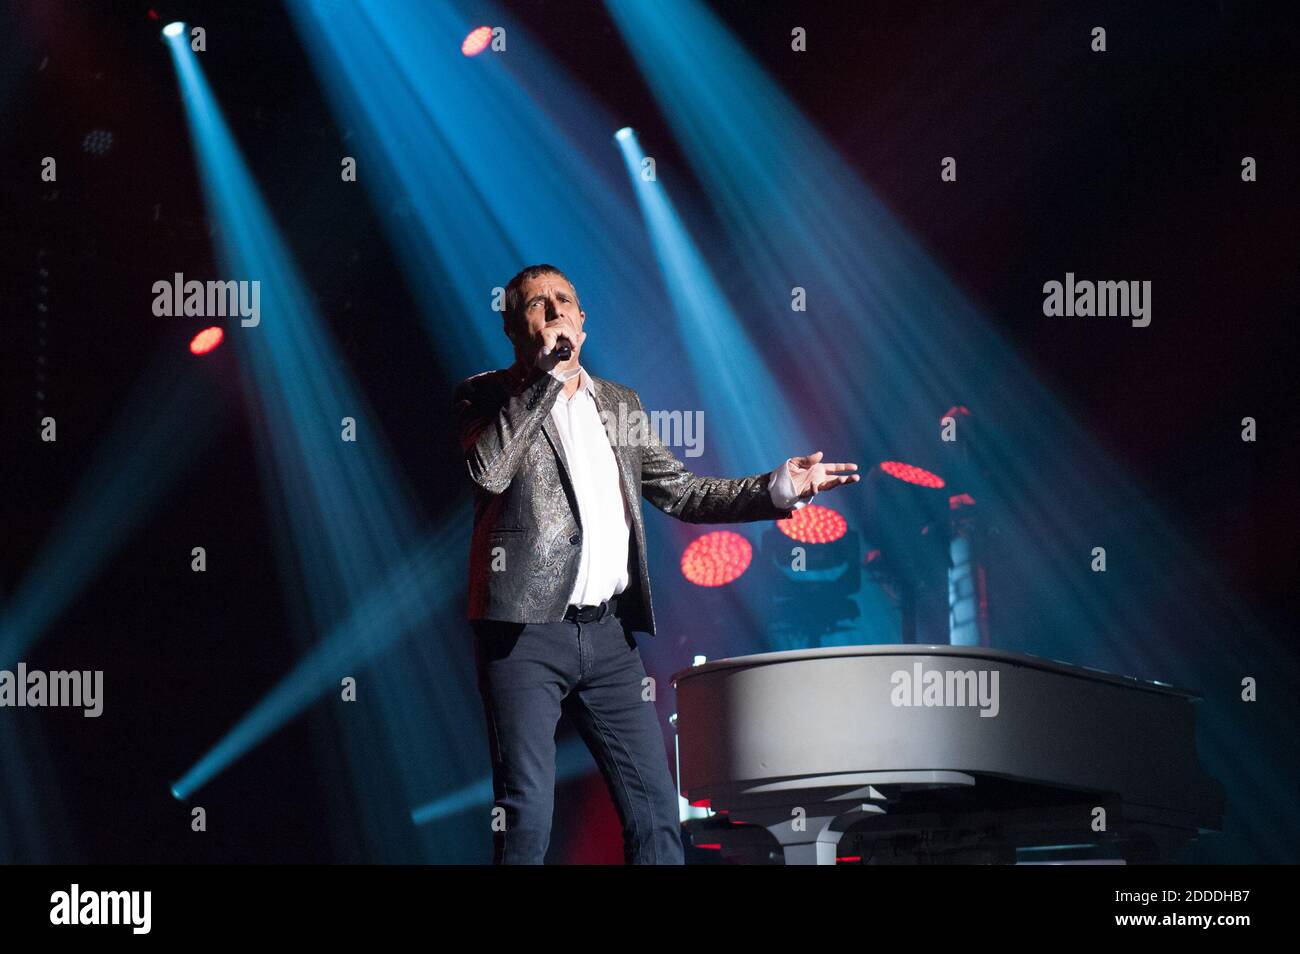 Julien Clerc performs at the Francofolies festival in La Rochelle, France, on July 15, 2018. Photo by Arnault Serriere / ABACAPRESS.COM Stock Photo